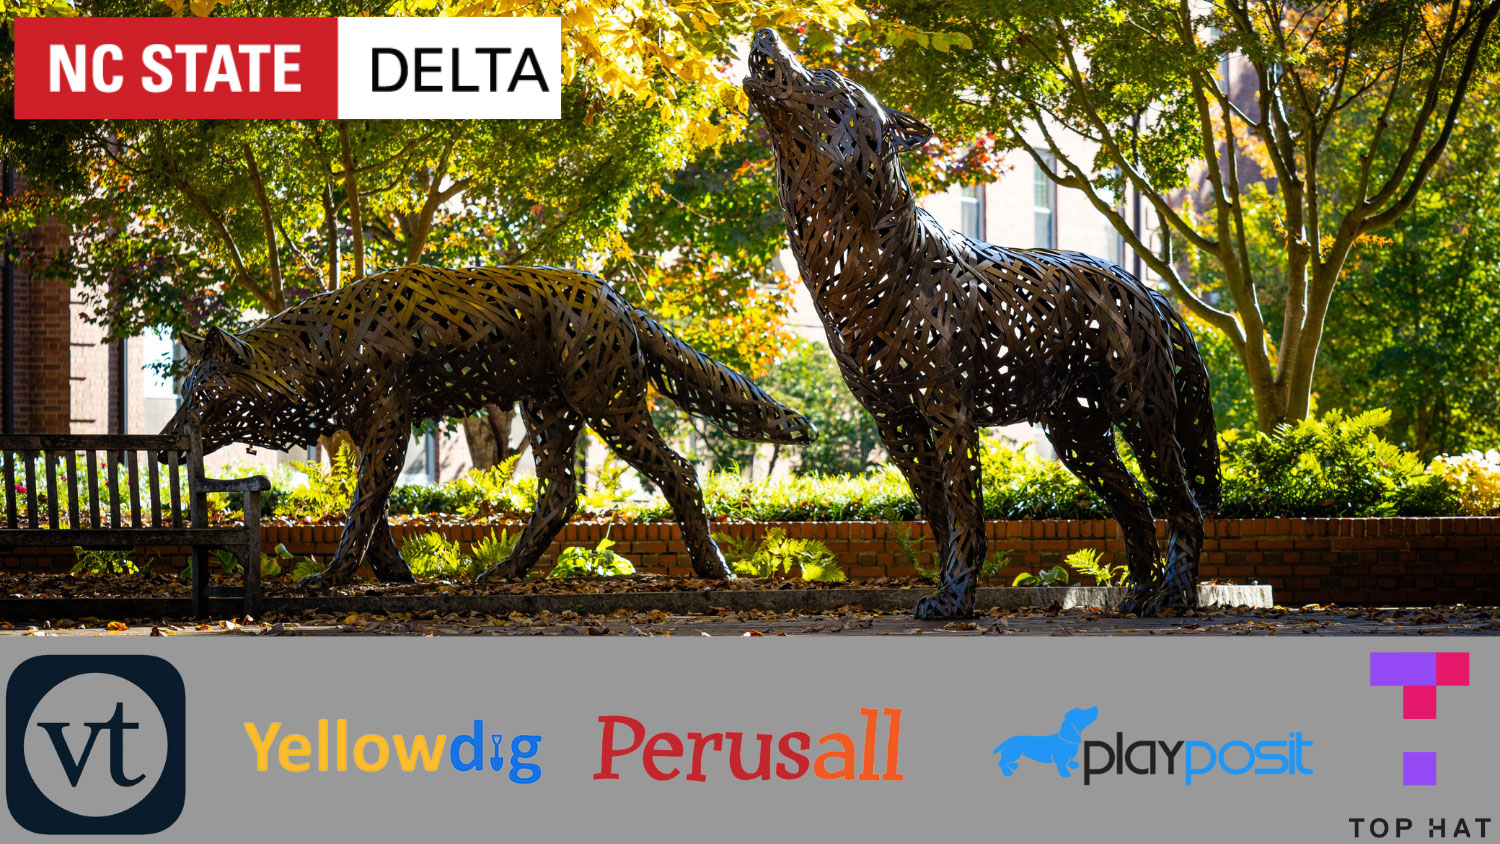 Decorative: NC State DELTA, with learning technology vendor logos.